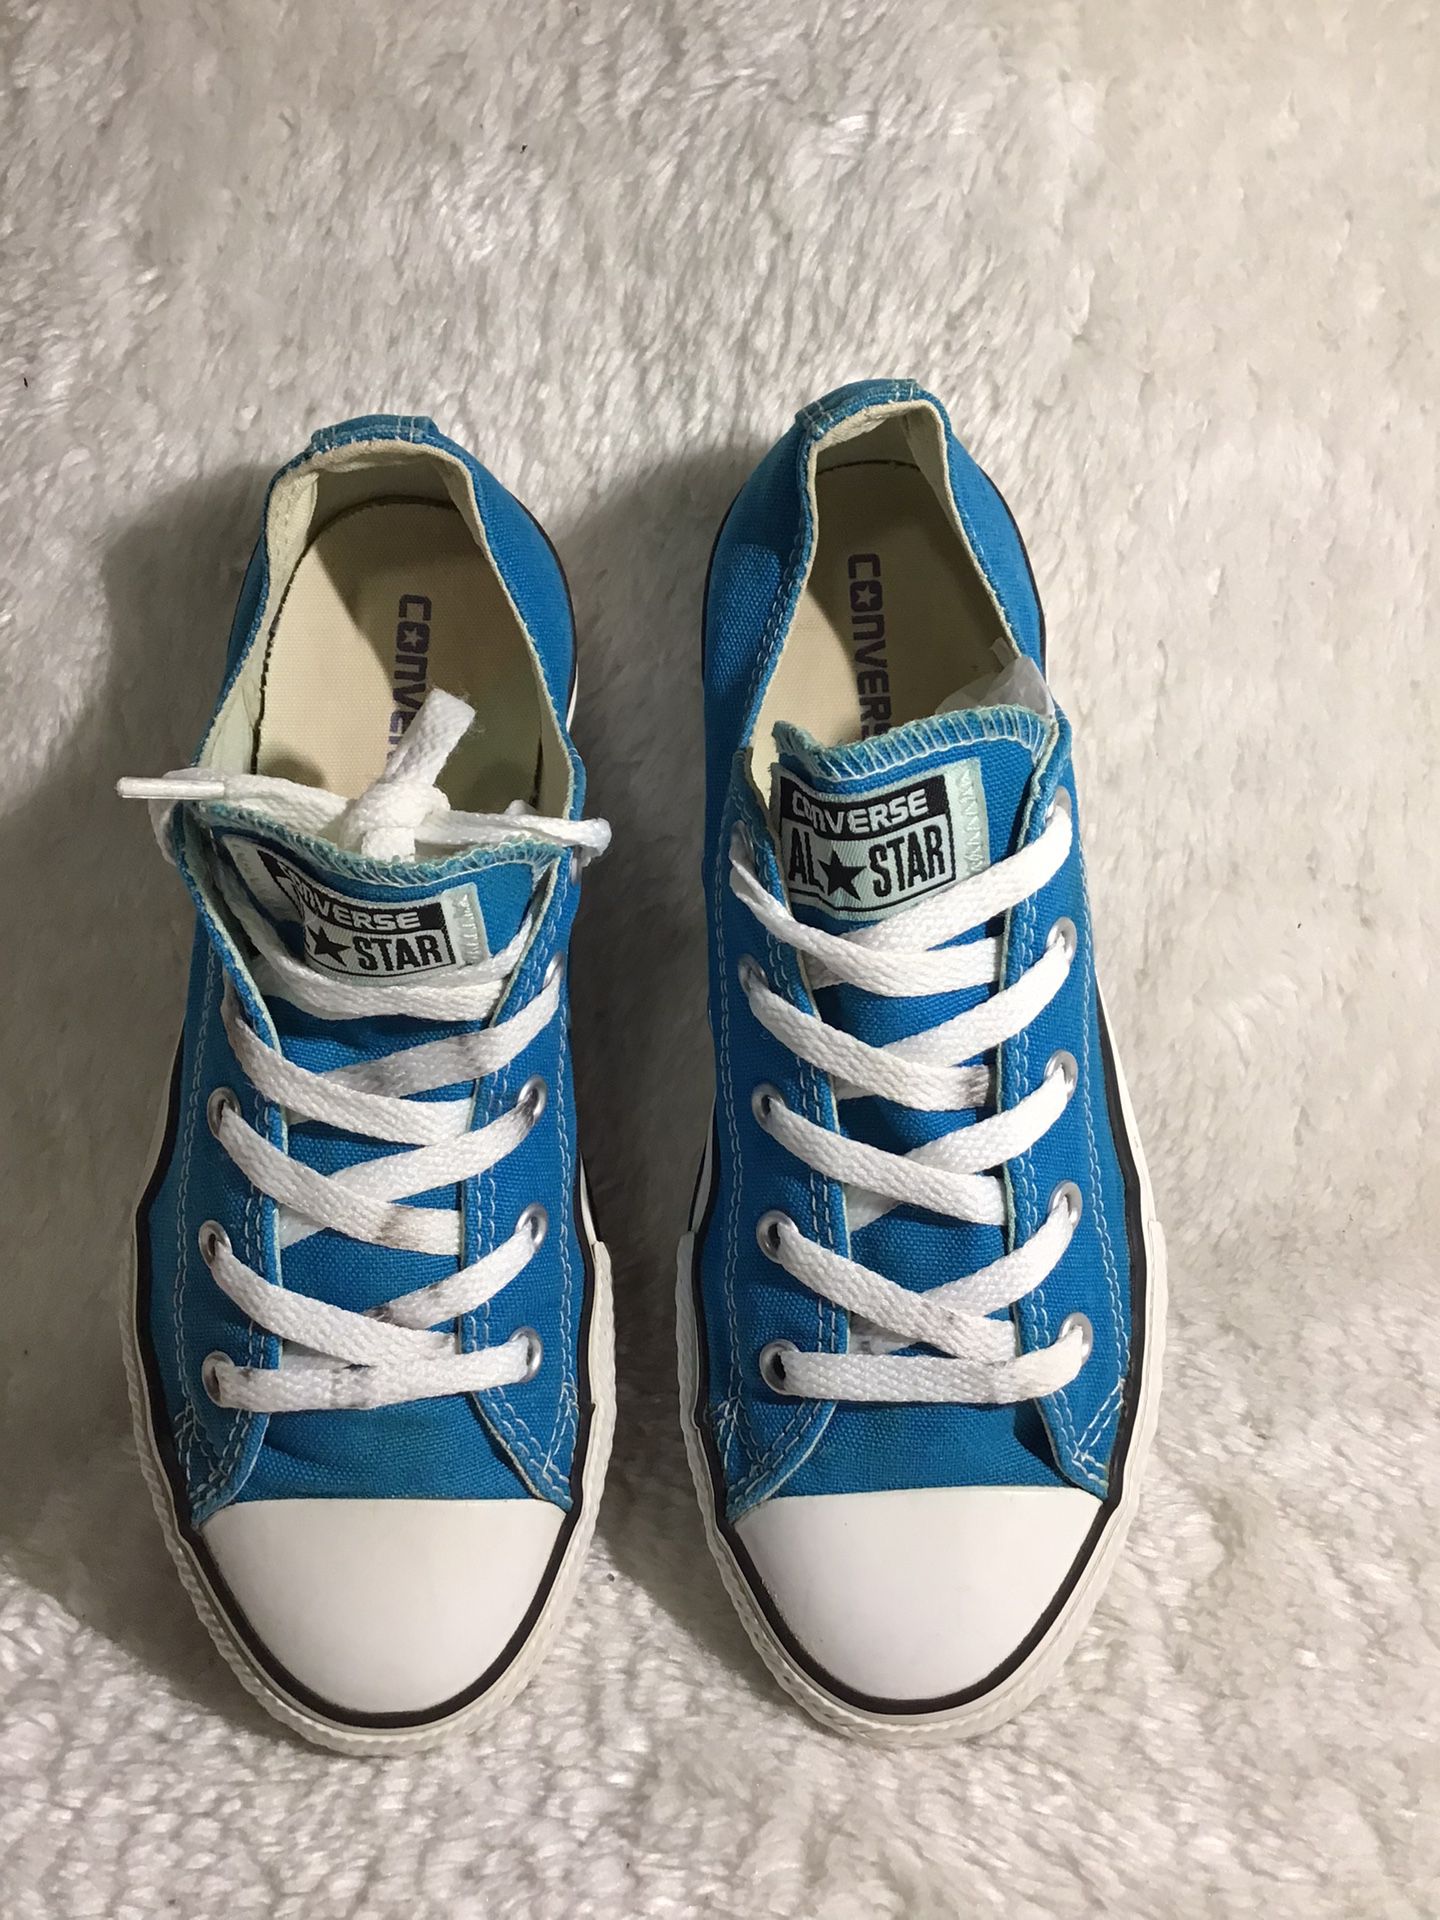 Converse All Star Low Top Size 3